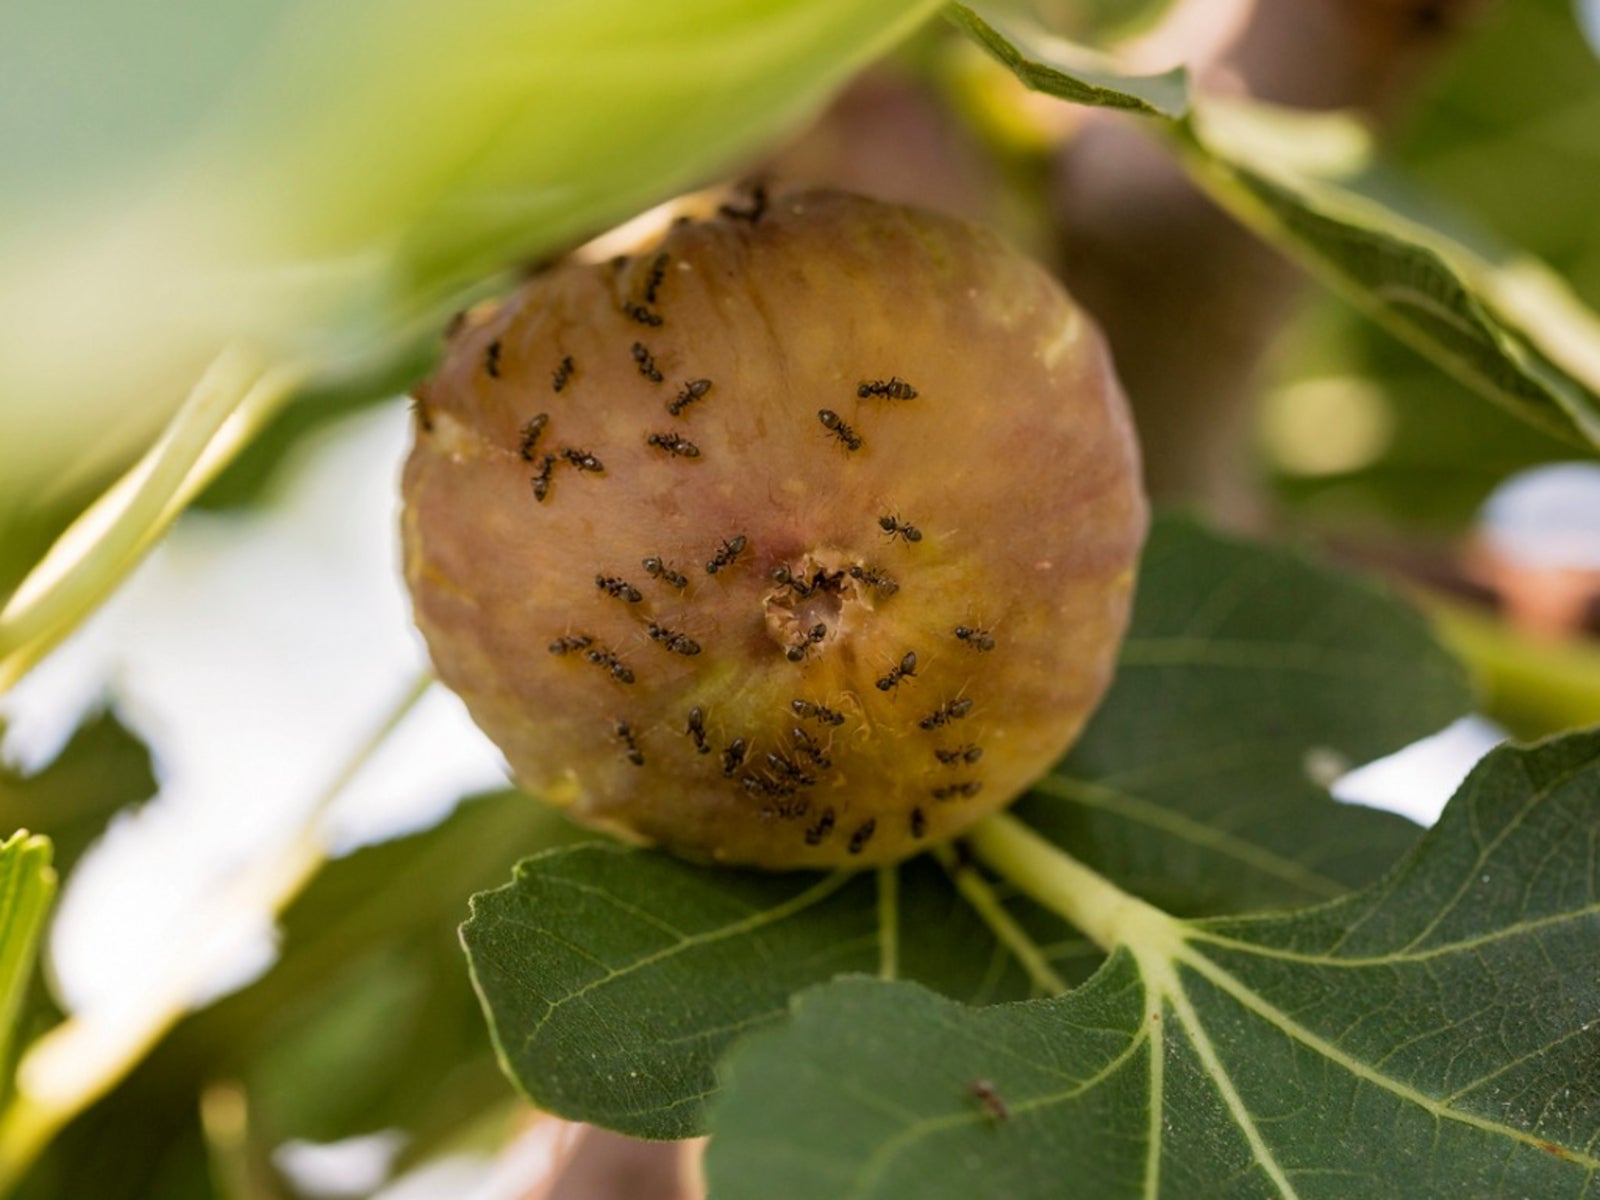 How to control ants on fruit trees